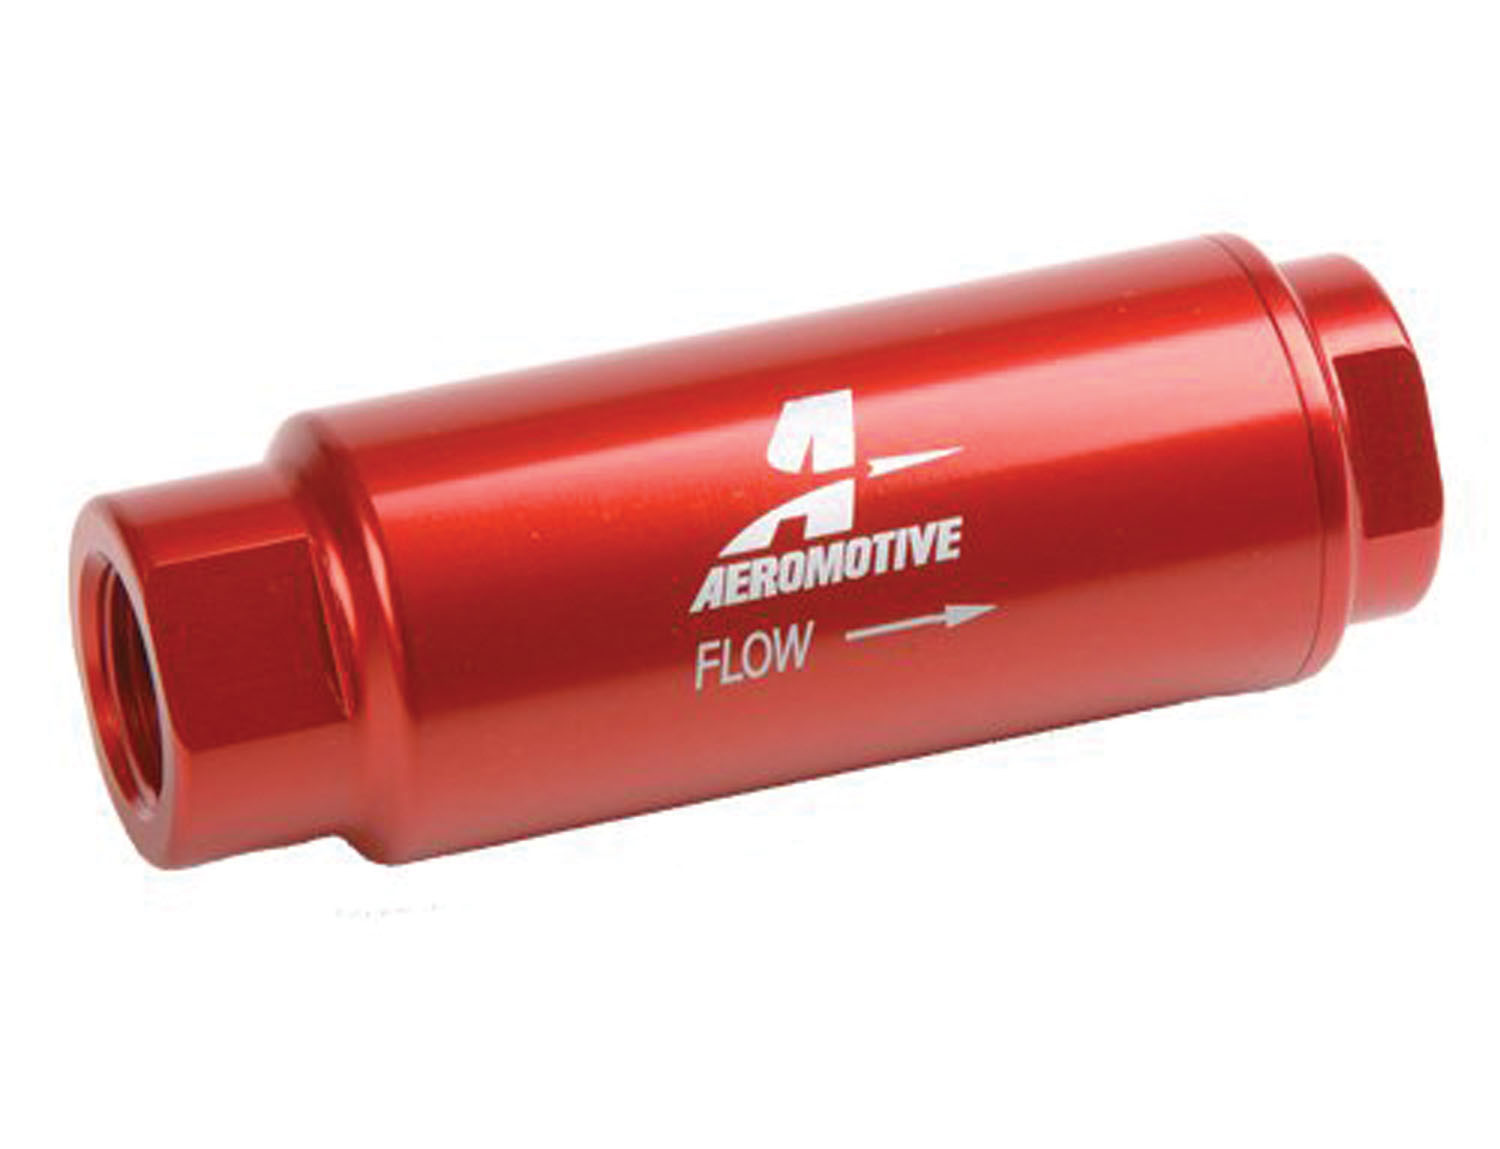 Aeromotive 12303 Fuel Filter, SS Series, In-Line, 40 Micron, Fabric Element, 3/8 in NPT Female Inlet, 3/8 in NPT Female Outlet, Aluminum, Red Anodized, Each